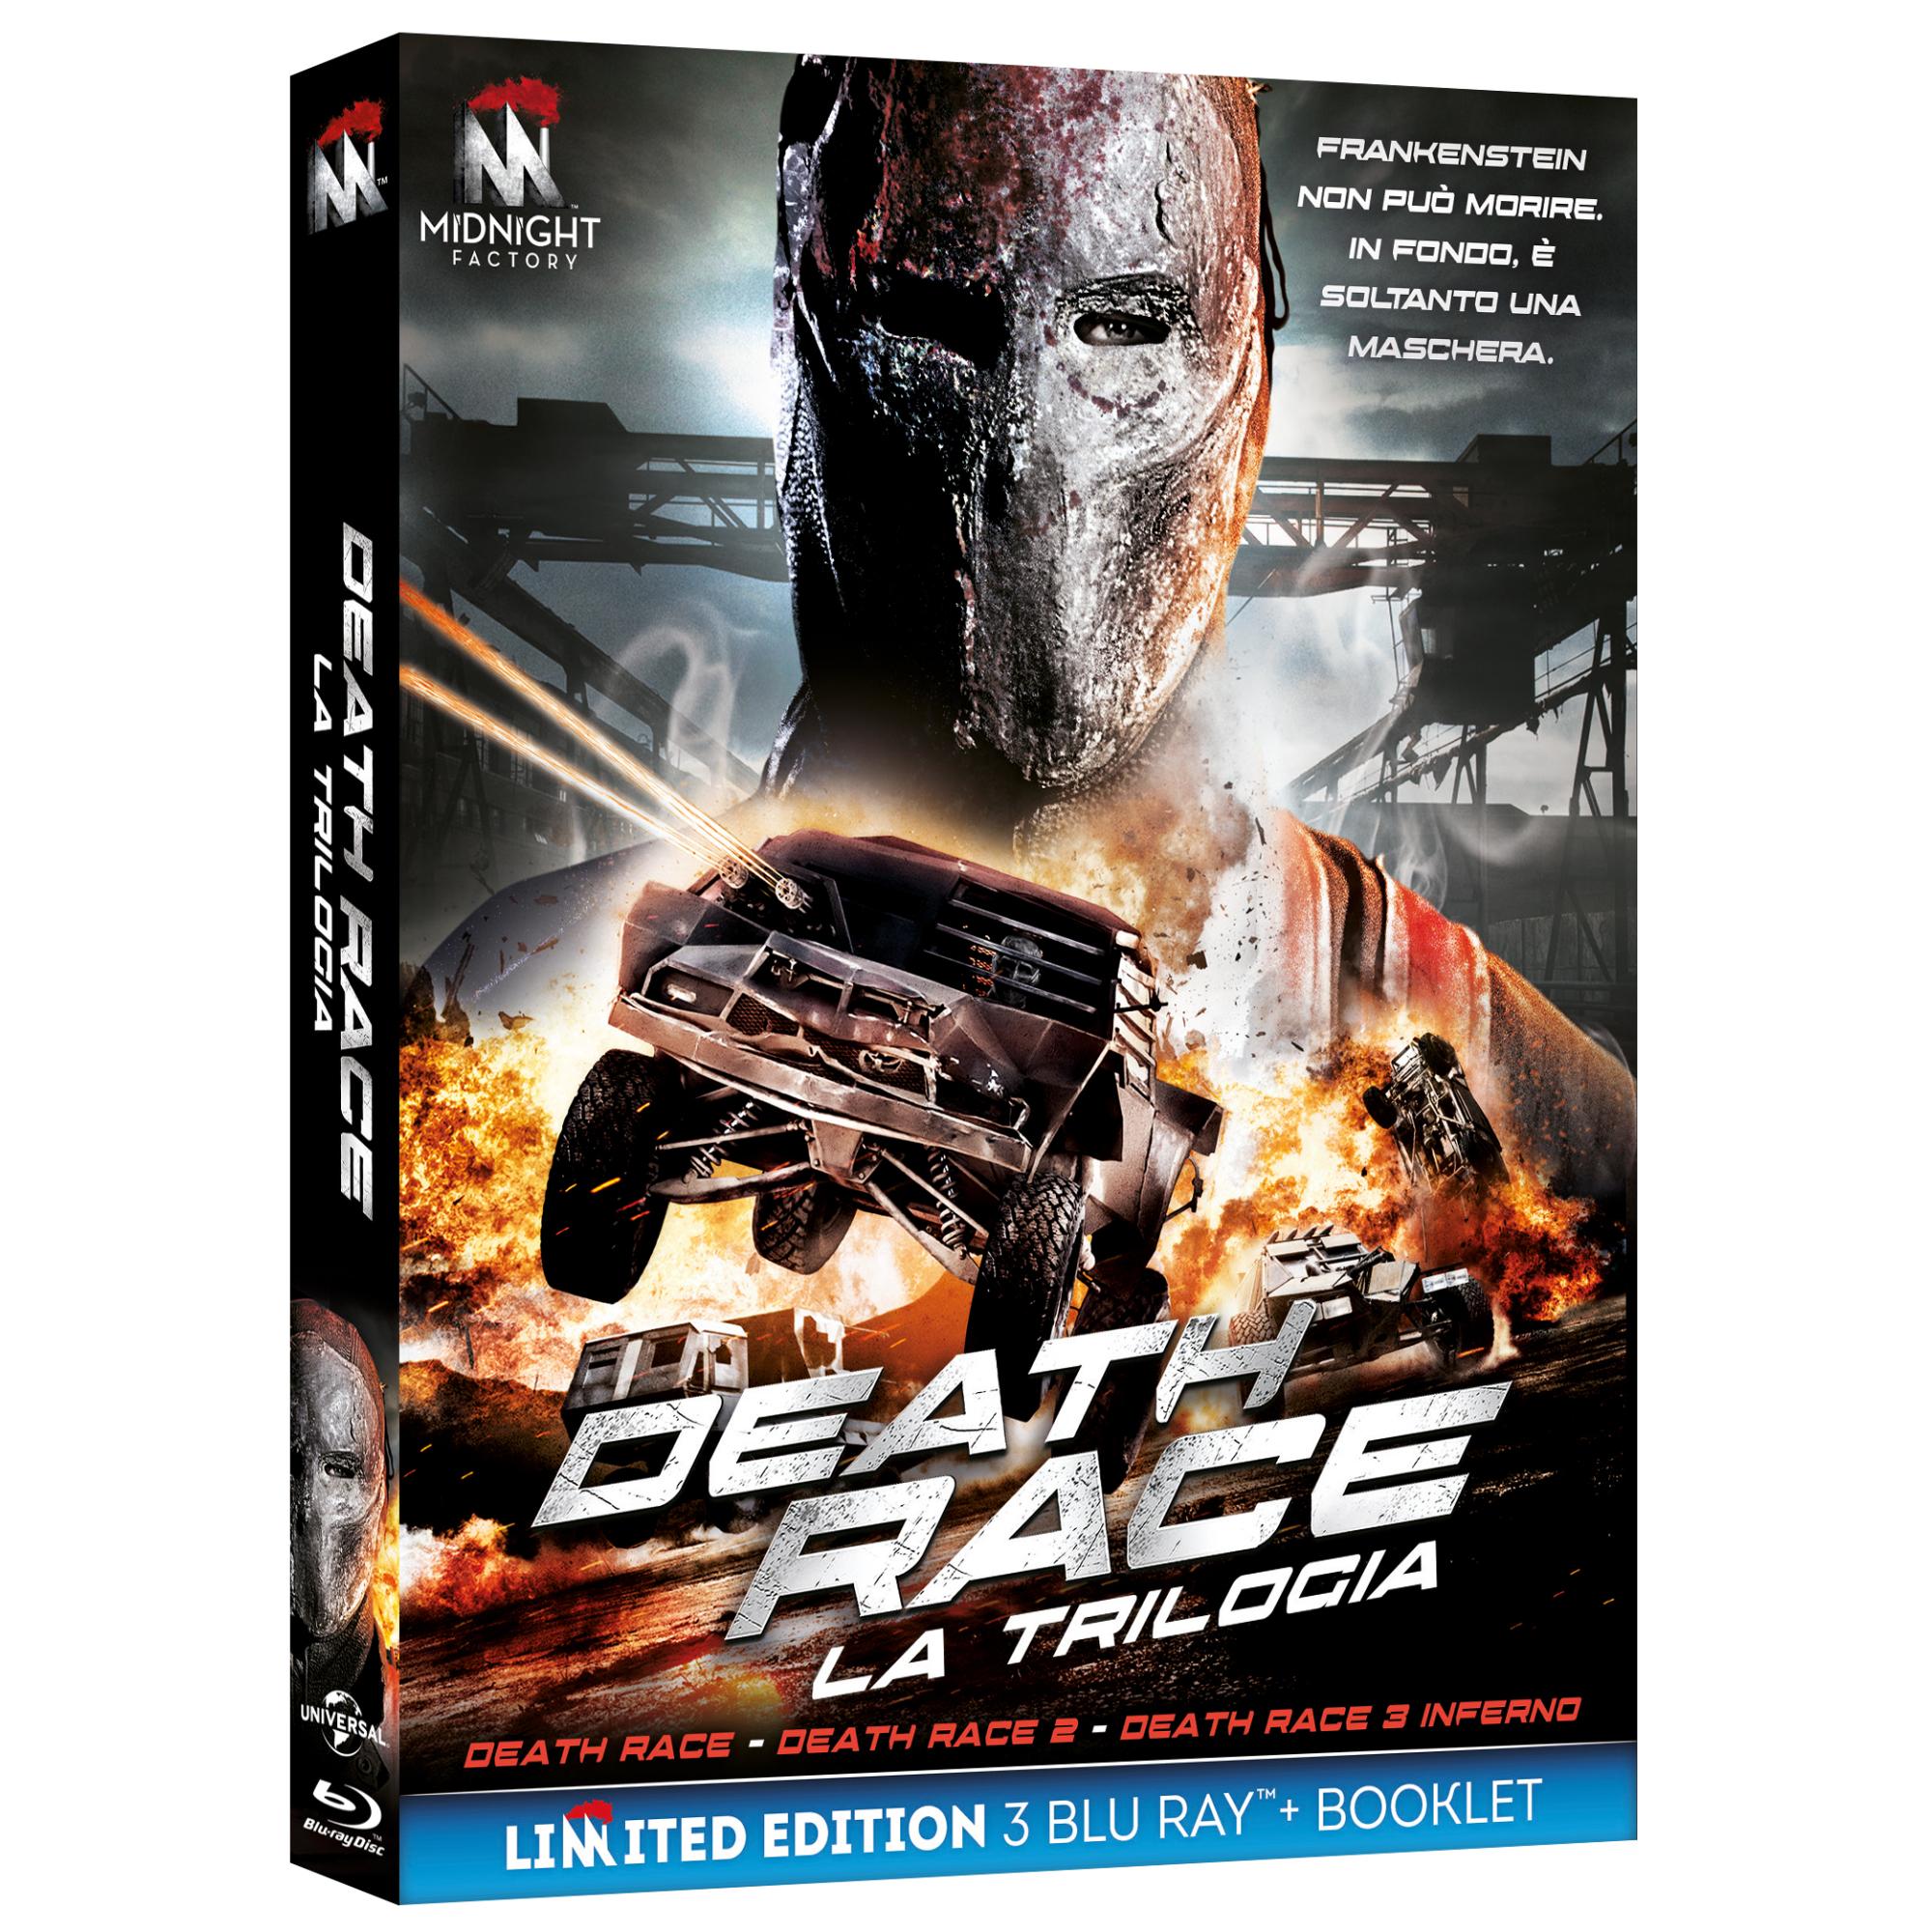 DEATH RACE COLLECTION (3 BLU-RAY+BOOKLET)